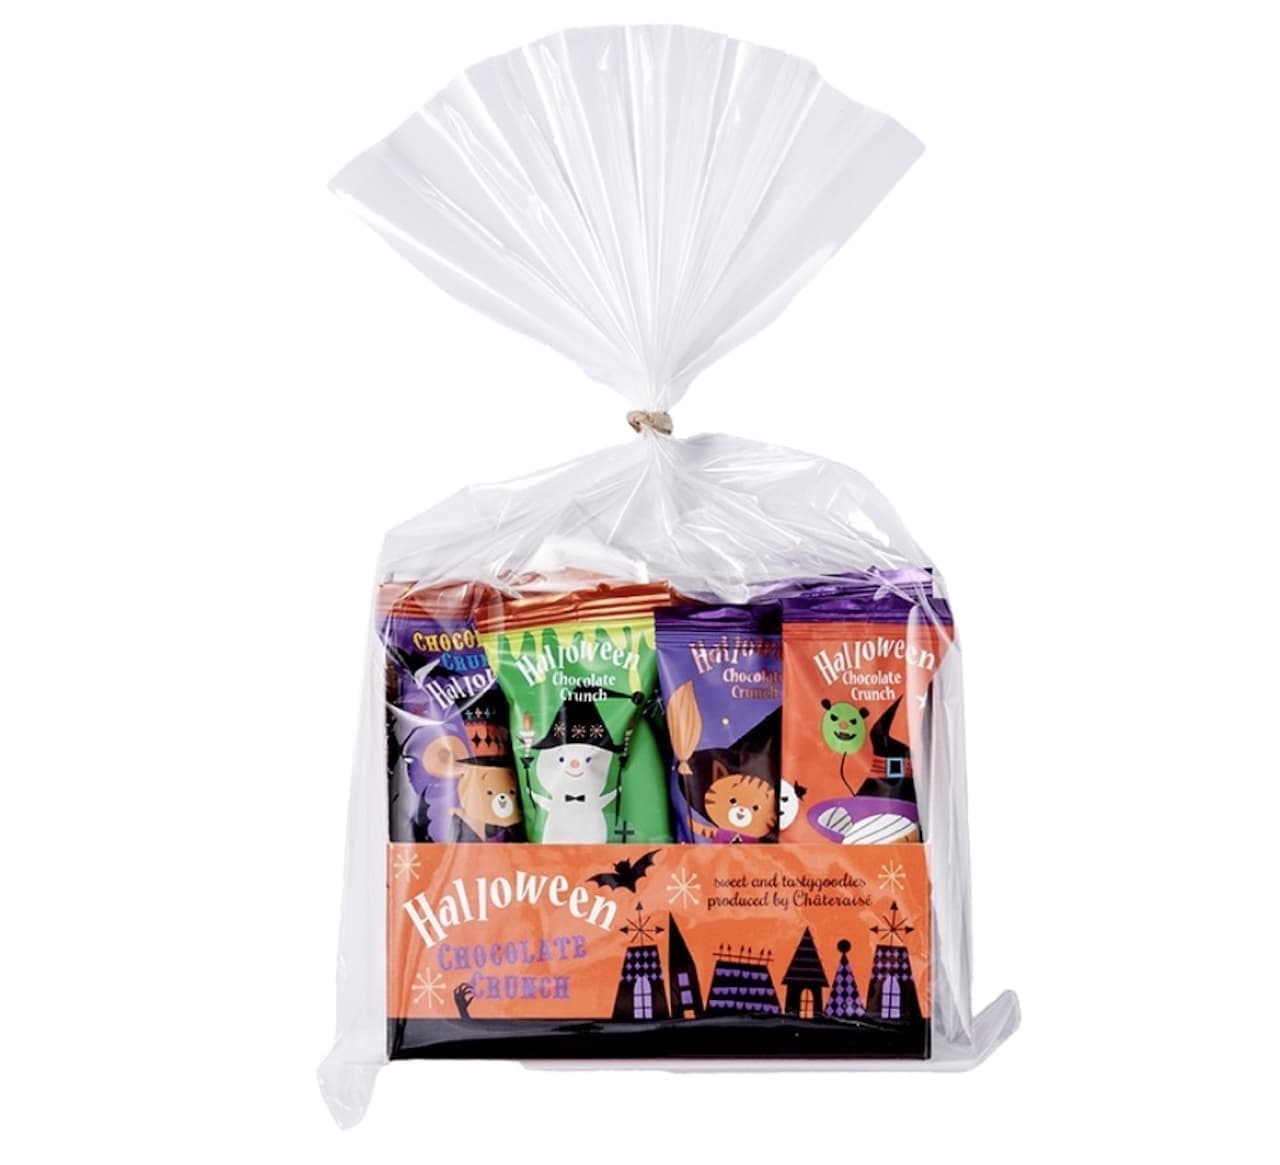 Chateraise "Halloween Chocolate Crunch 8 pieces